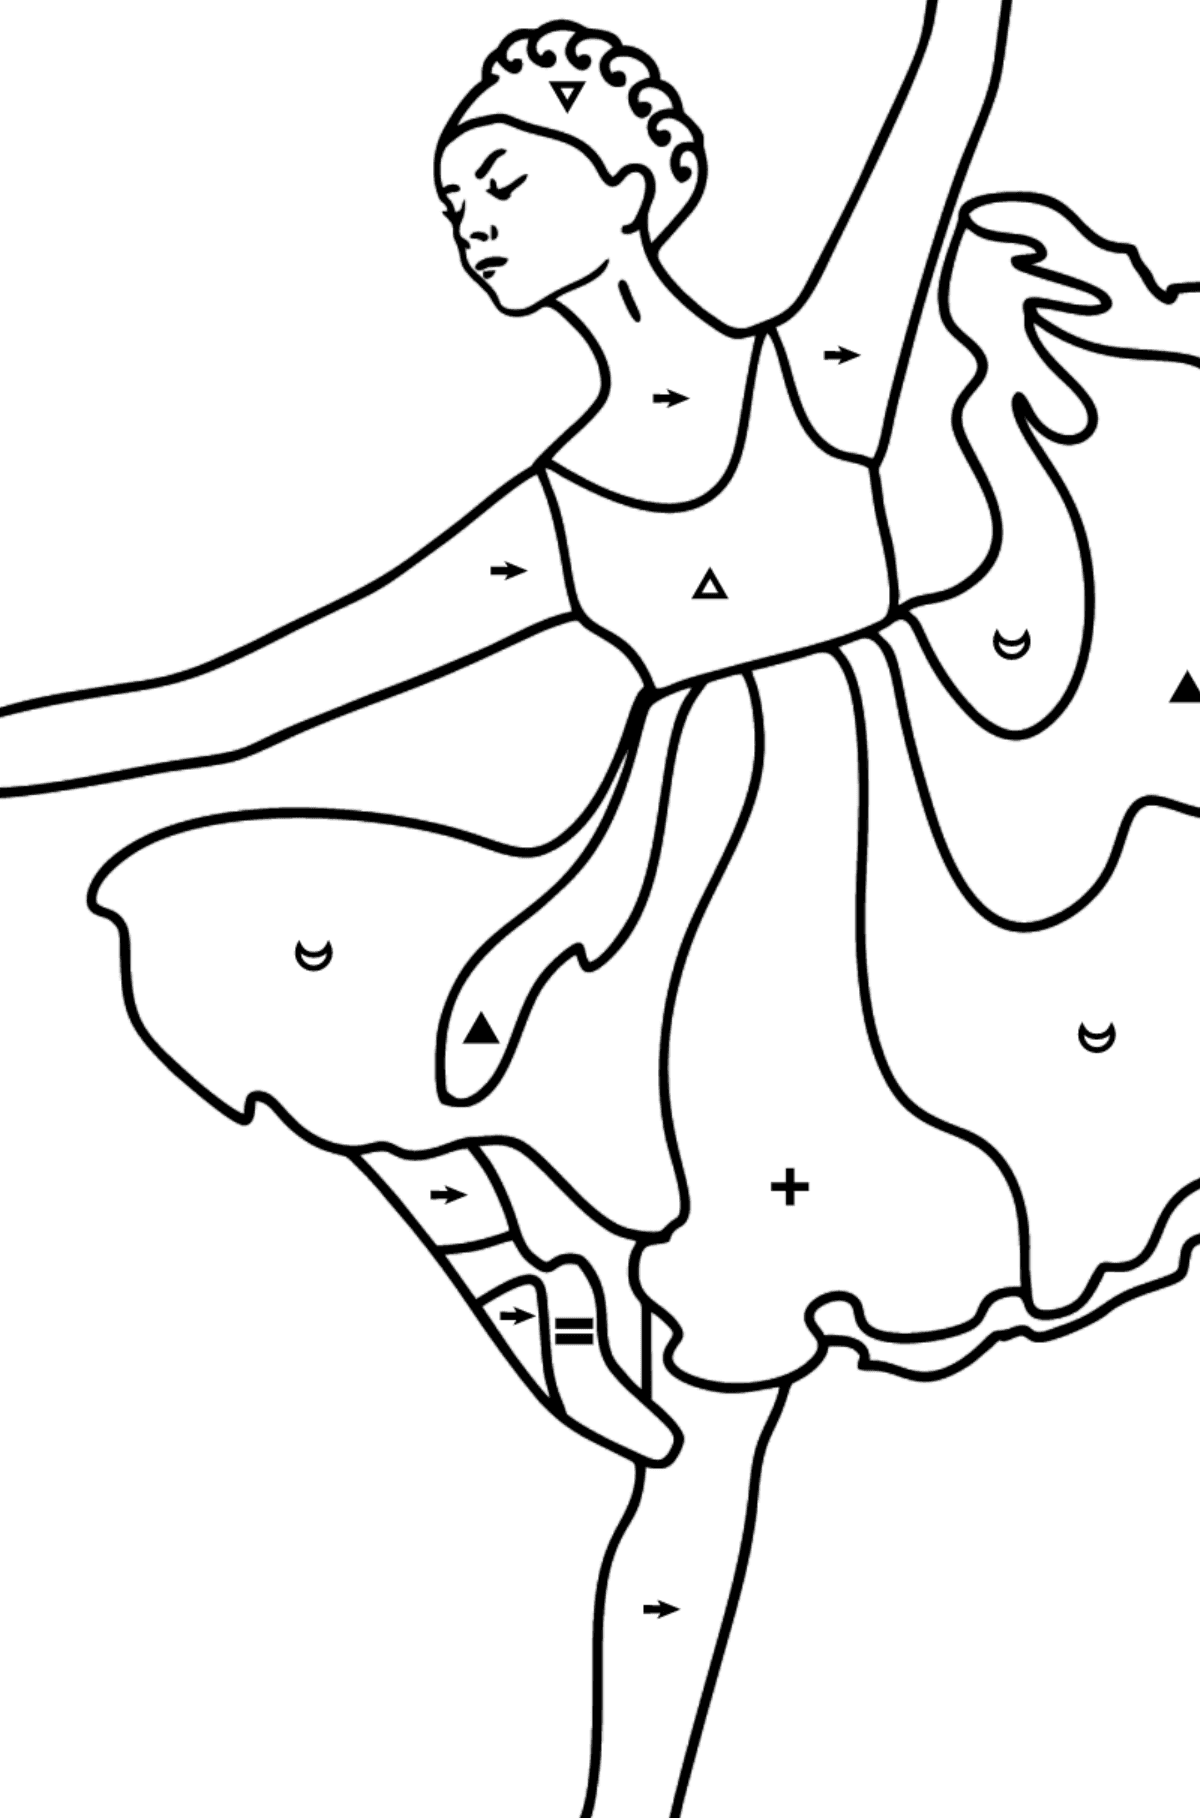 Ballerina in Lilac Dress coloring page - Coloring by Symbols for Kids